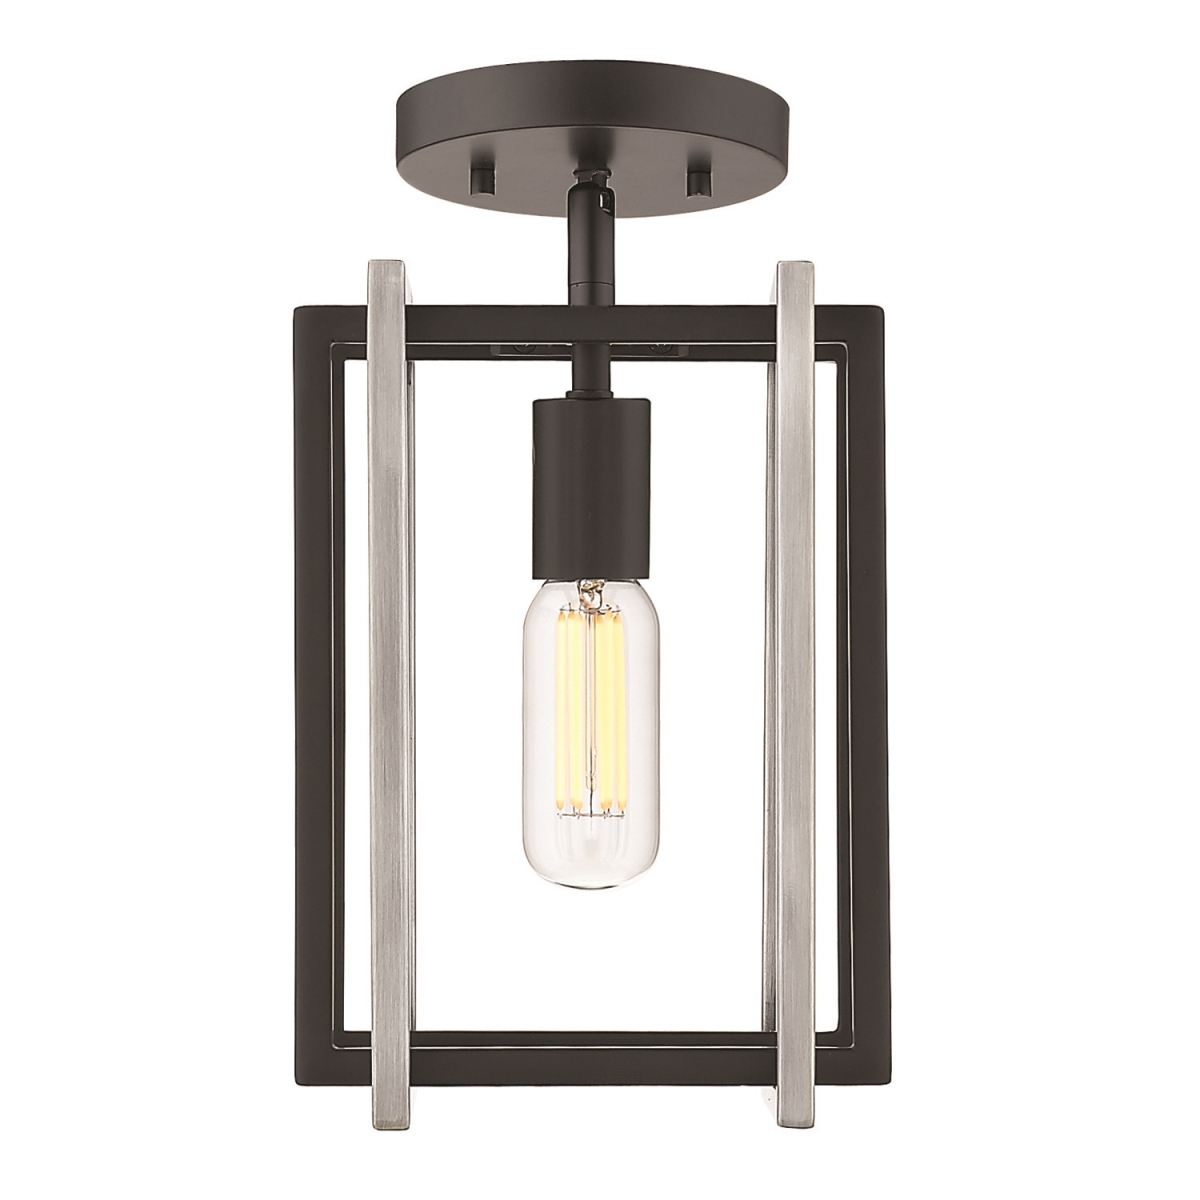 Golden Lighting 6070-1SF BLK-PW Tribeca 1-Light Semi-Flush Mount with Pewter Accents, Black